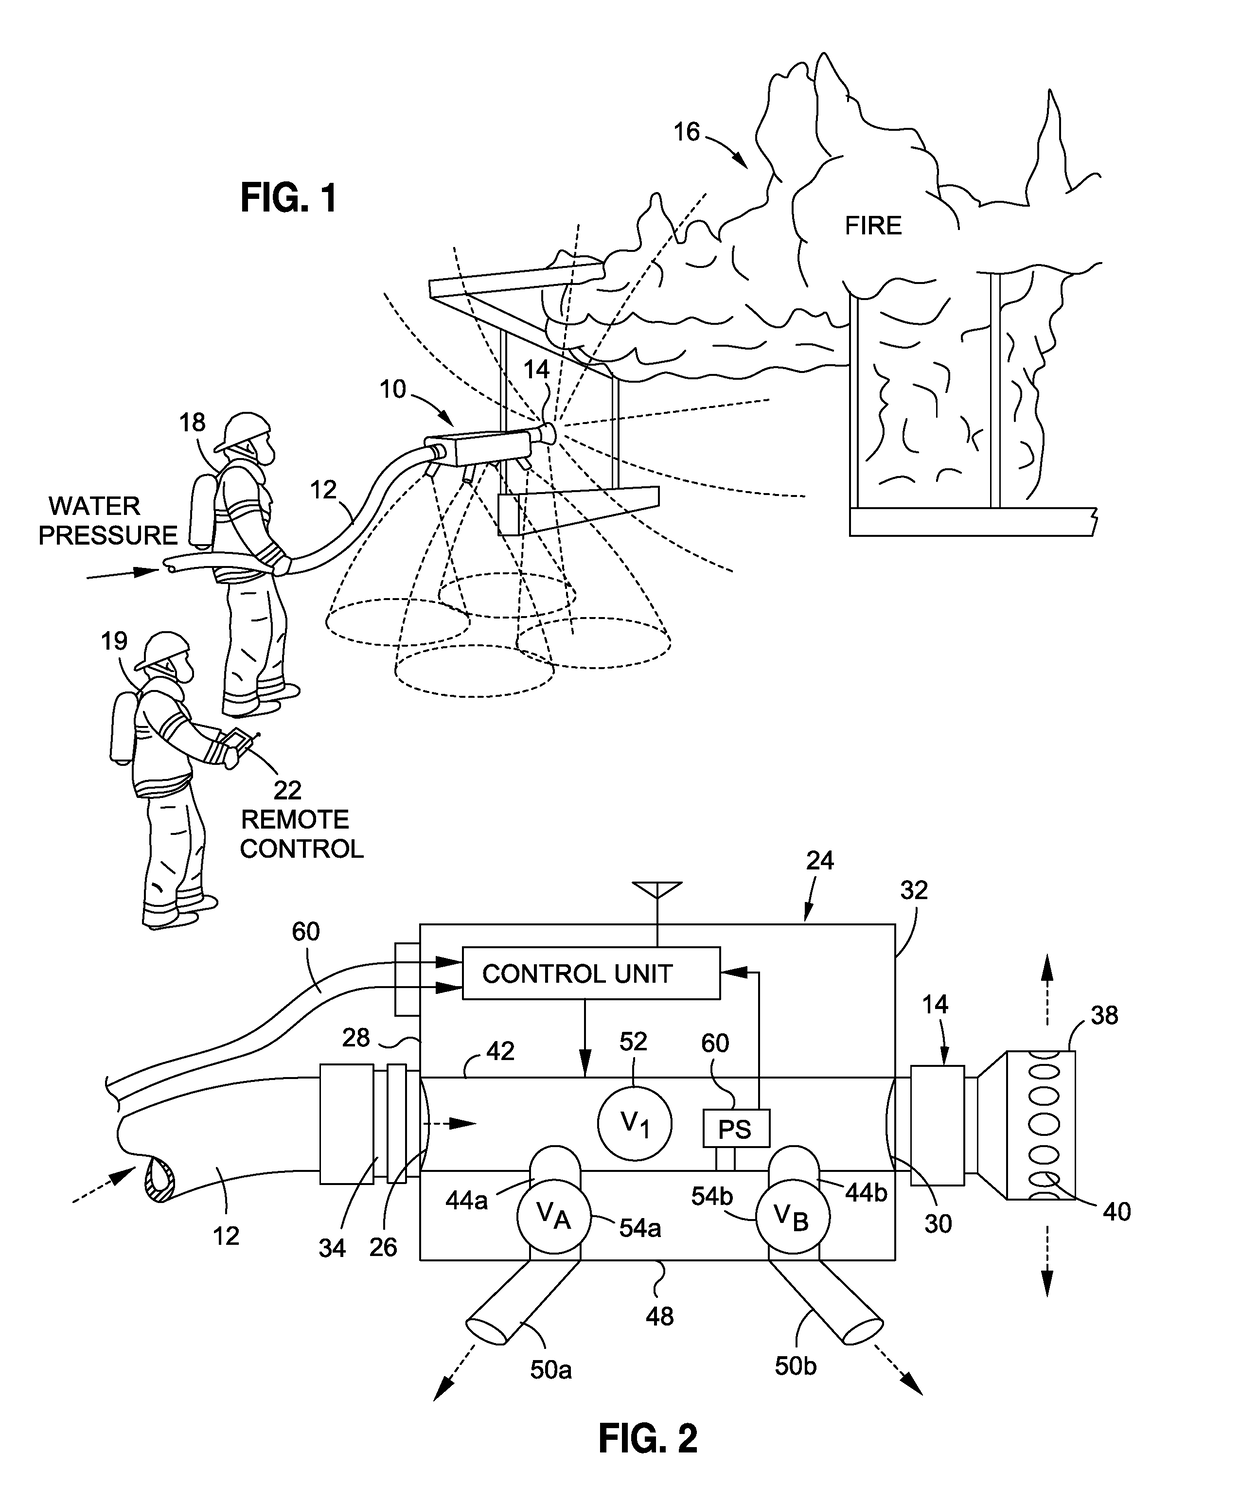 Hydraulically Propelled Drone for Delivering Firefighting fluid